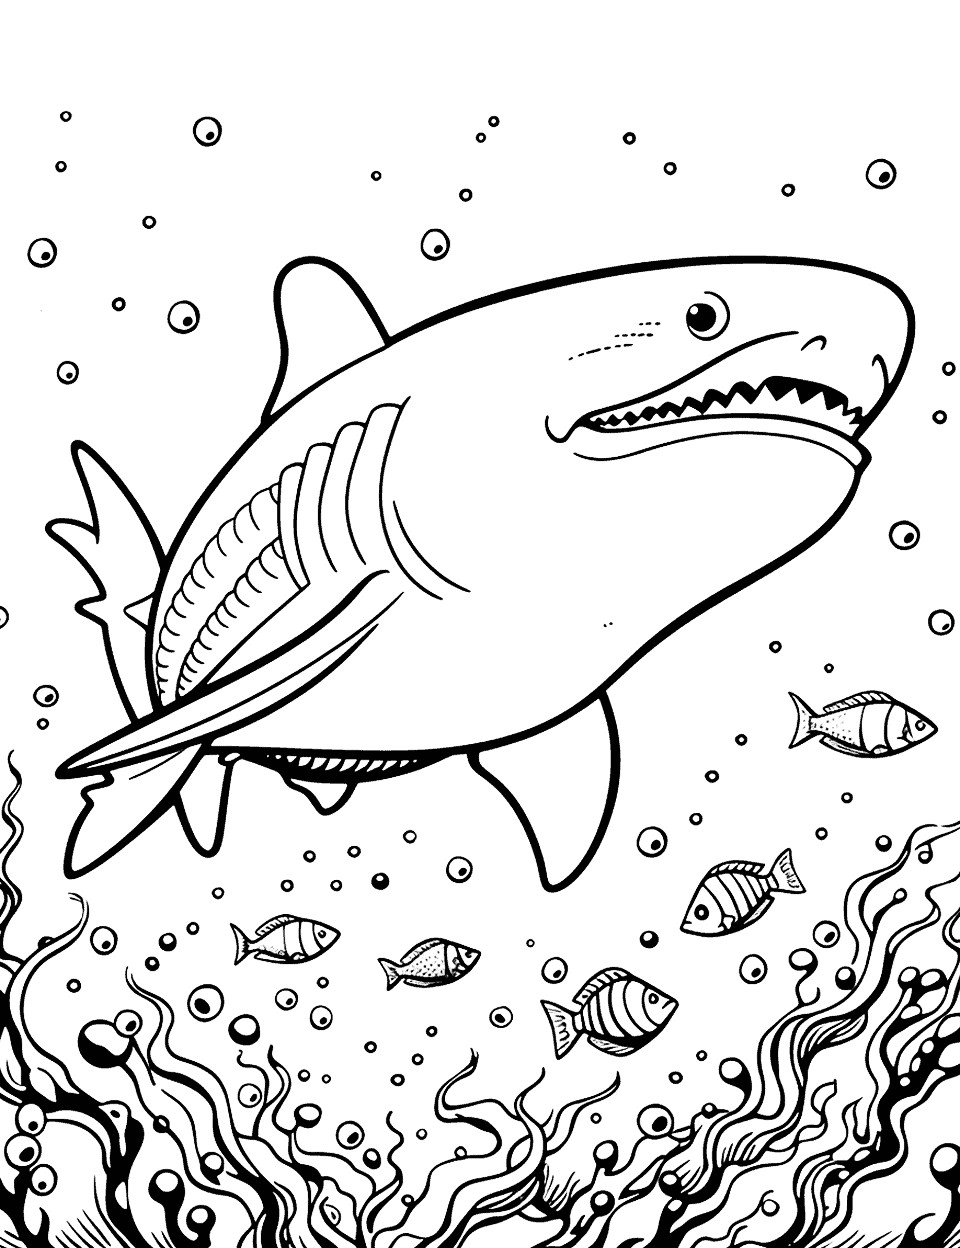 Whale Shark and Plankton Coloring Page - A whale shark feeding on a swarm of plankton.